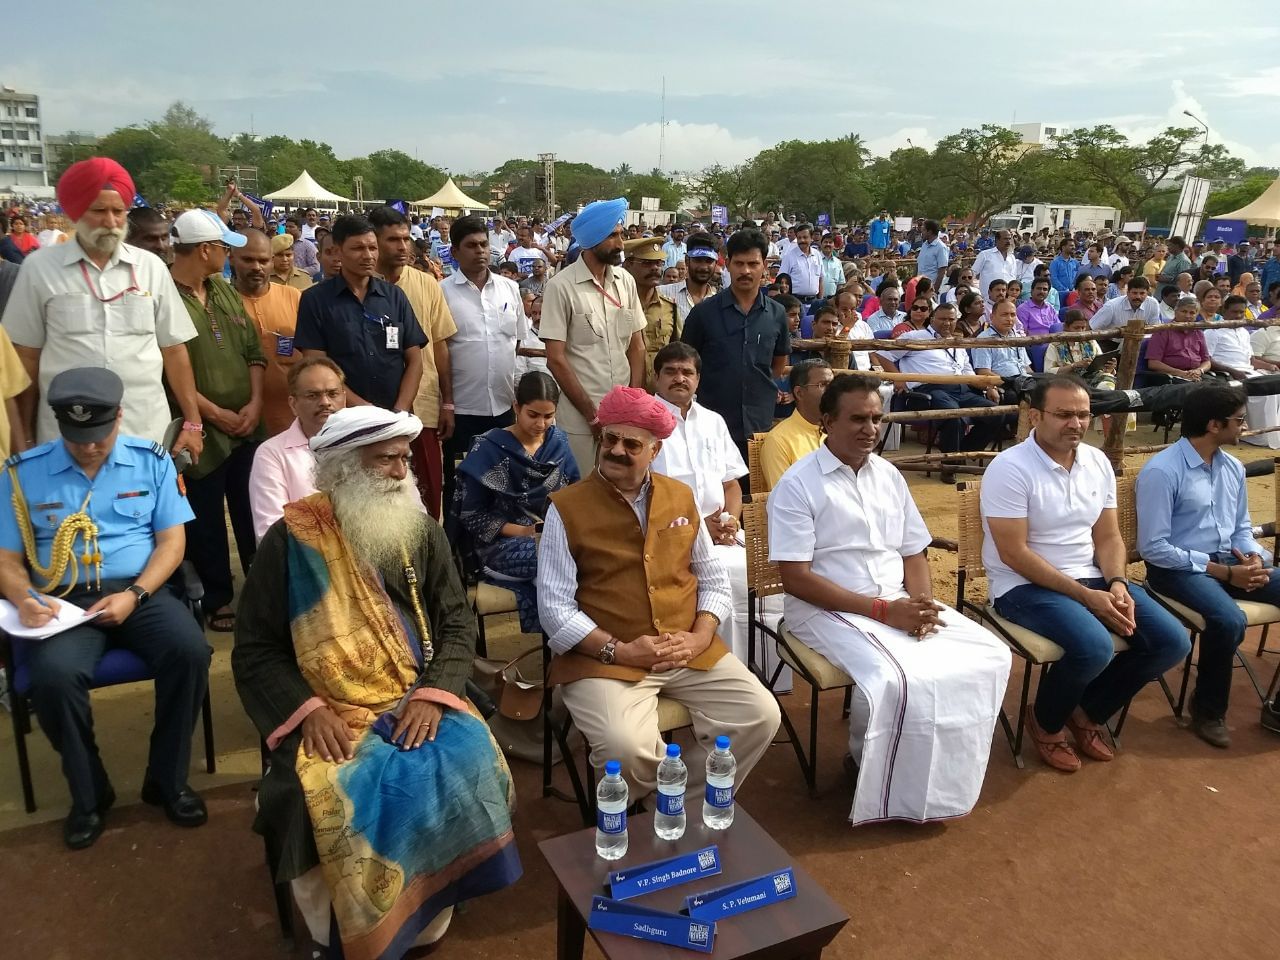 Rally For Rivers Sadhguru and Chief Guests Reaches the Venue Day 01 Coimbatore 04